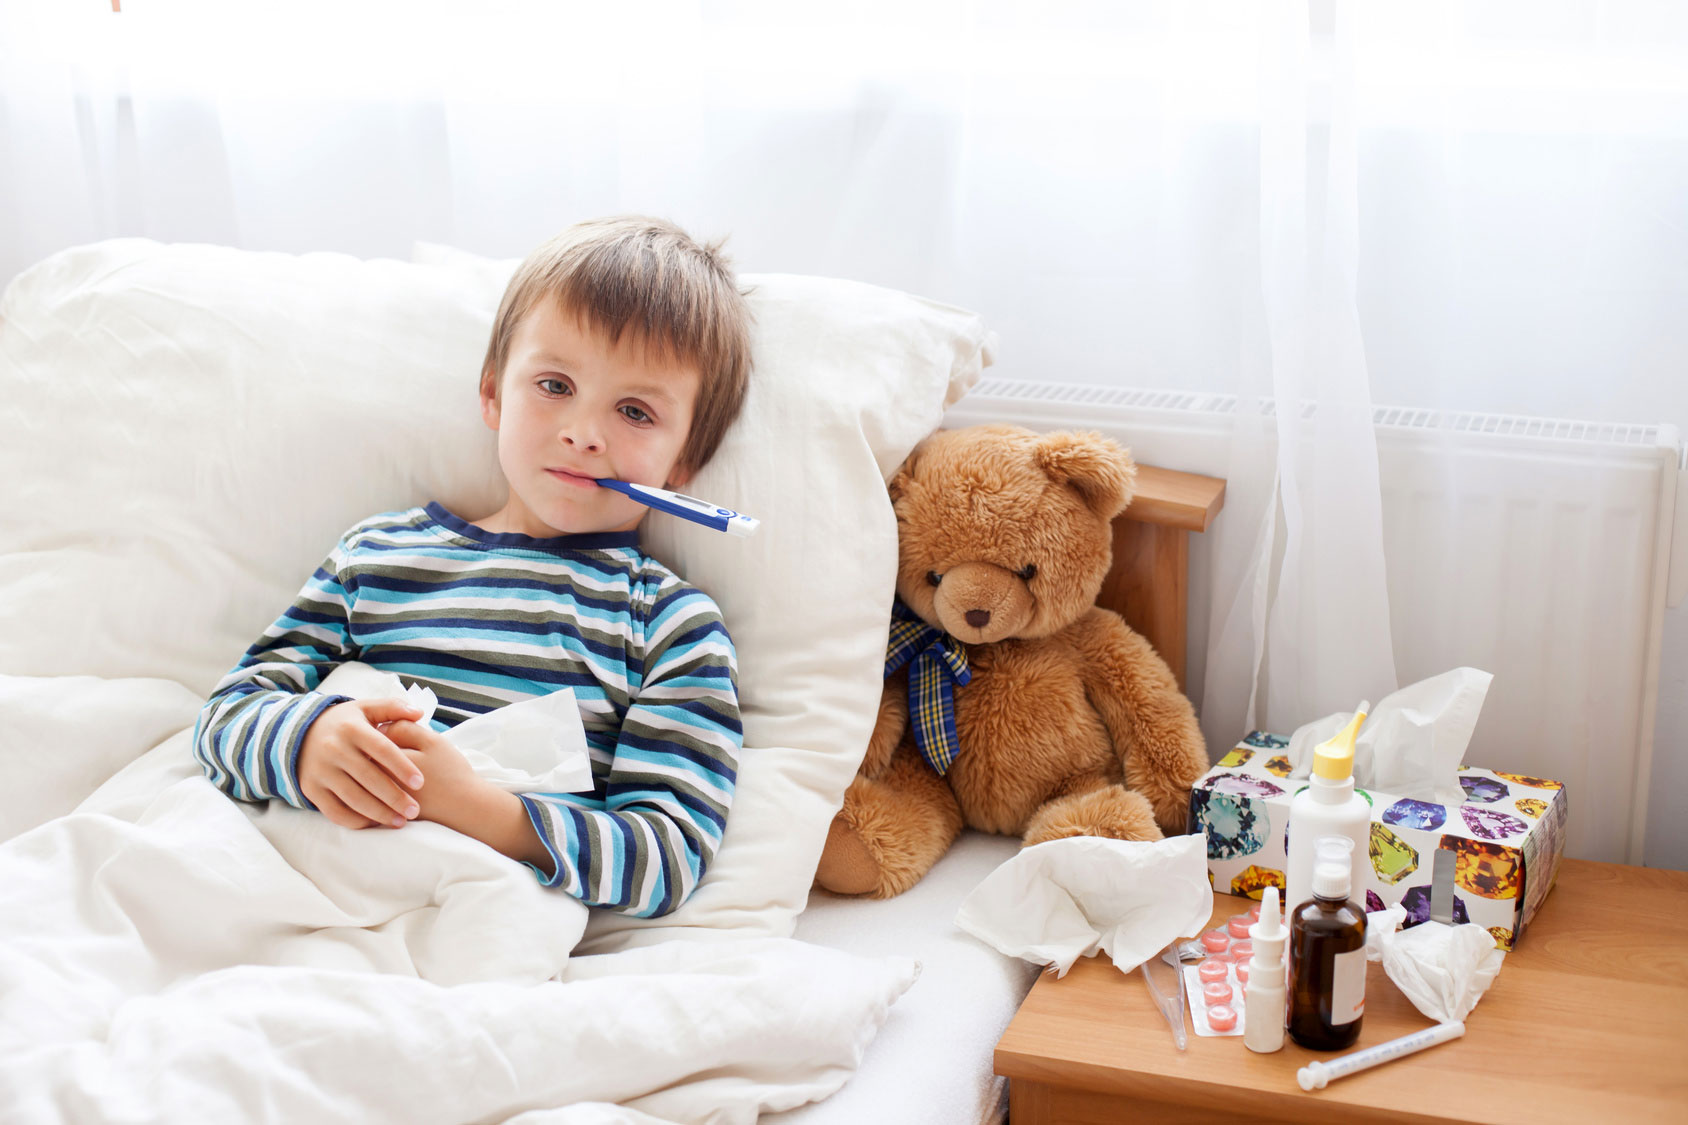 Stave Off Sickness These Season With These Cold & Flu Prevention Tips